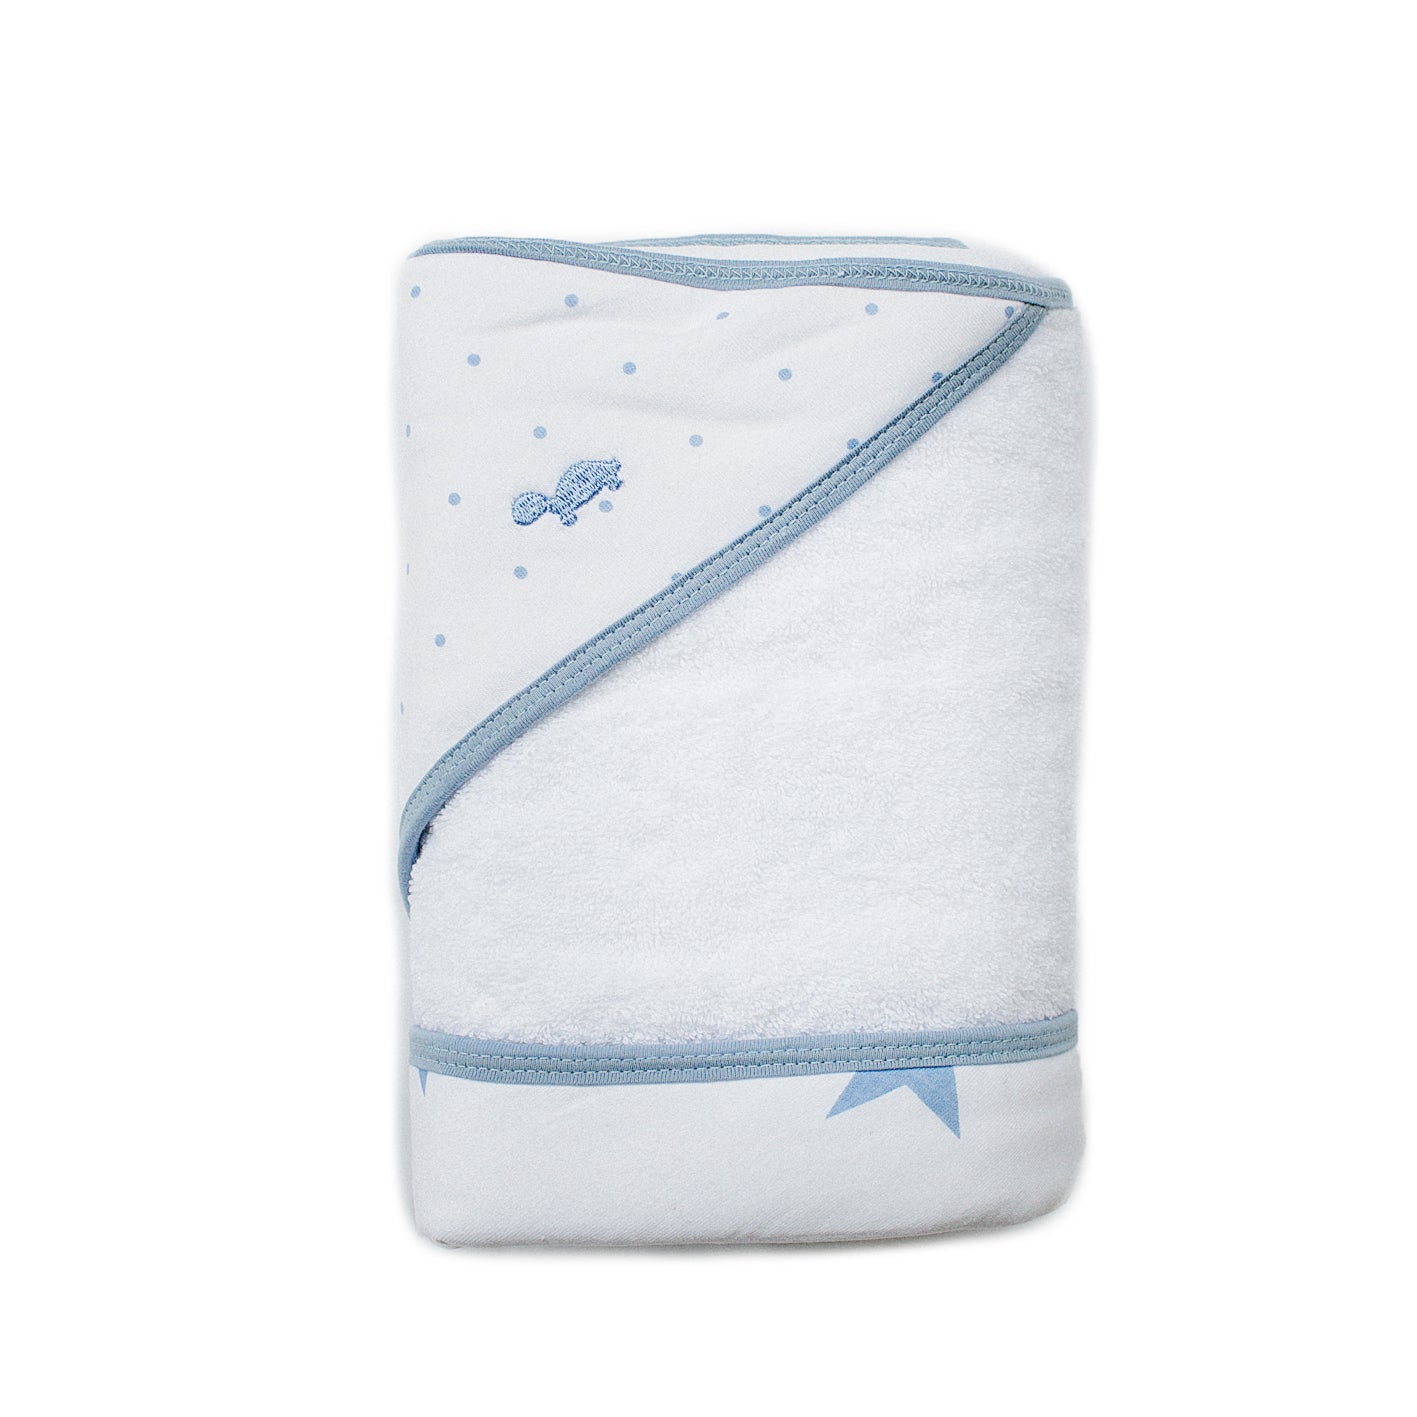 Little Turtle Baby, Hooded Towel, Soft on babies` skin, 100% Cotton Terry towelling and Cotton Jersey Towelling lined hood for extra comfort and absorbency, Traditional square style; size – 80cm x 80cm